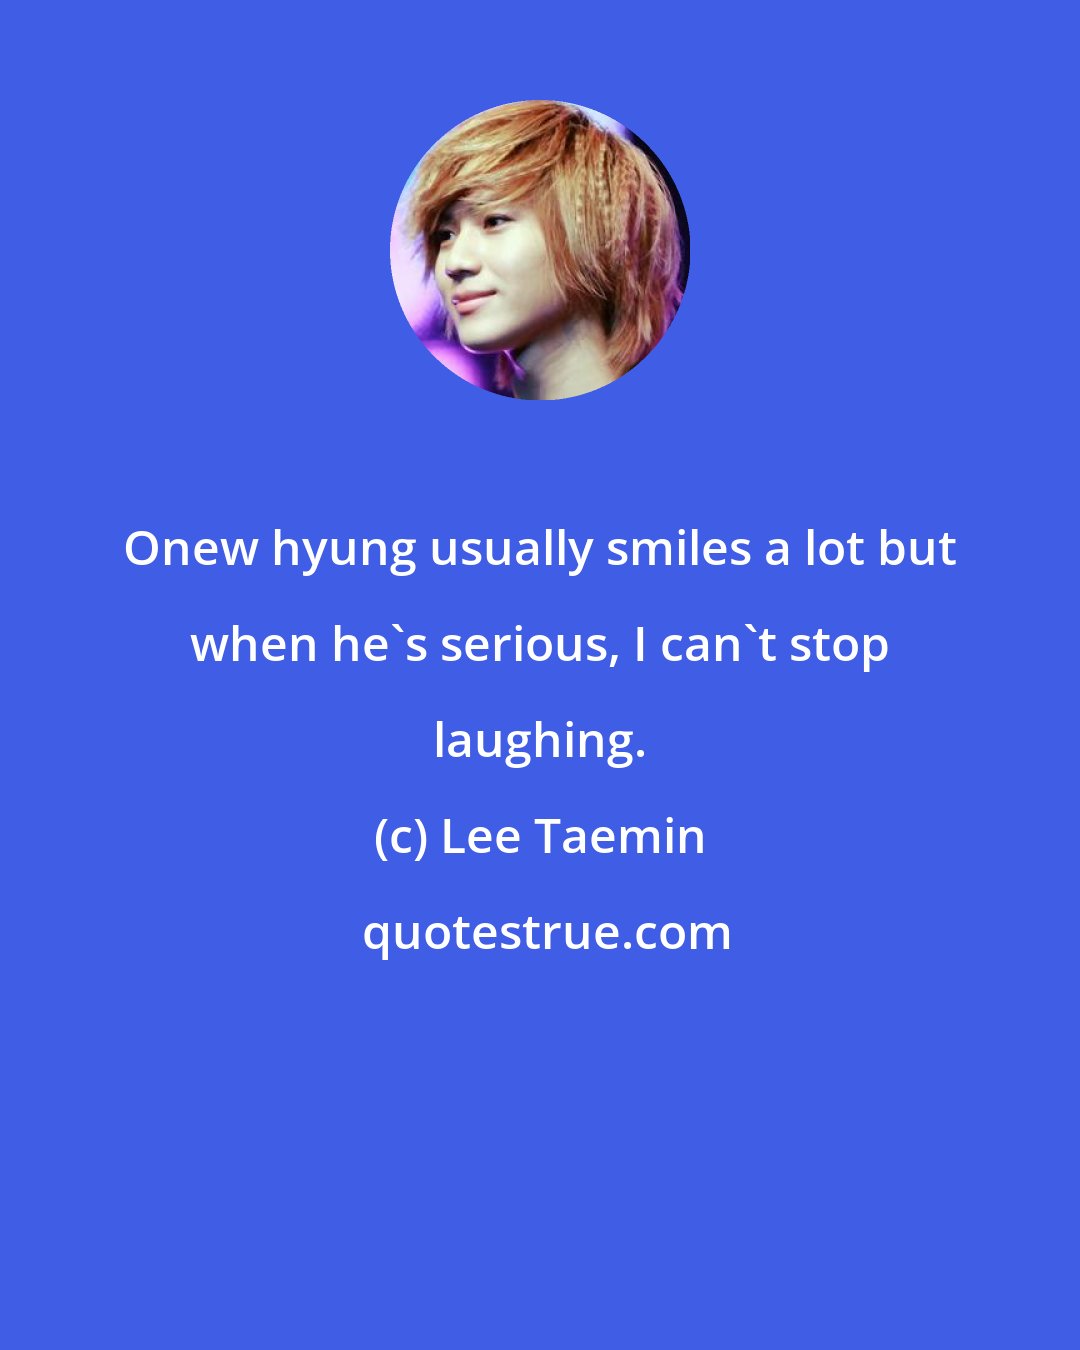 Lee Taemin: Onew hyung usually smiles a lot but when he's serious, I can't stop laughing.